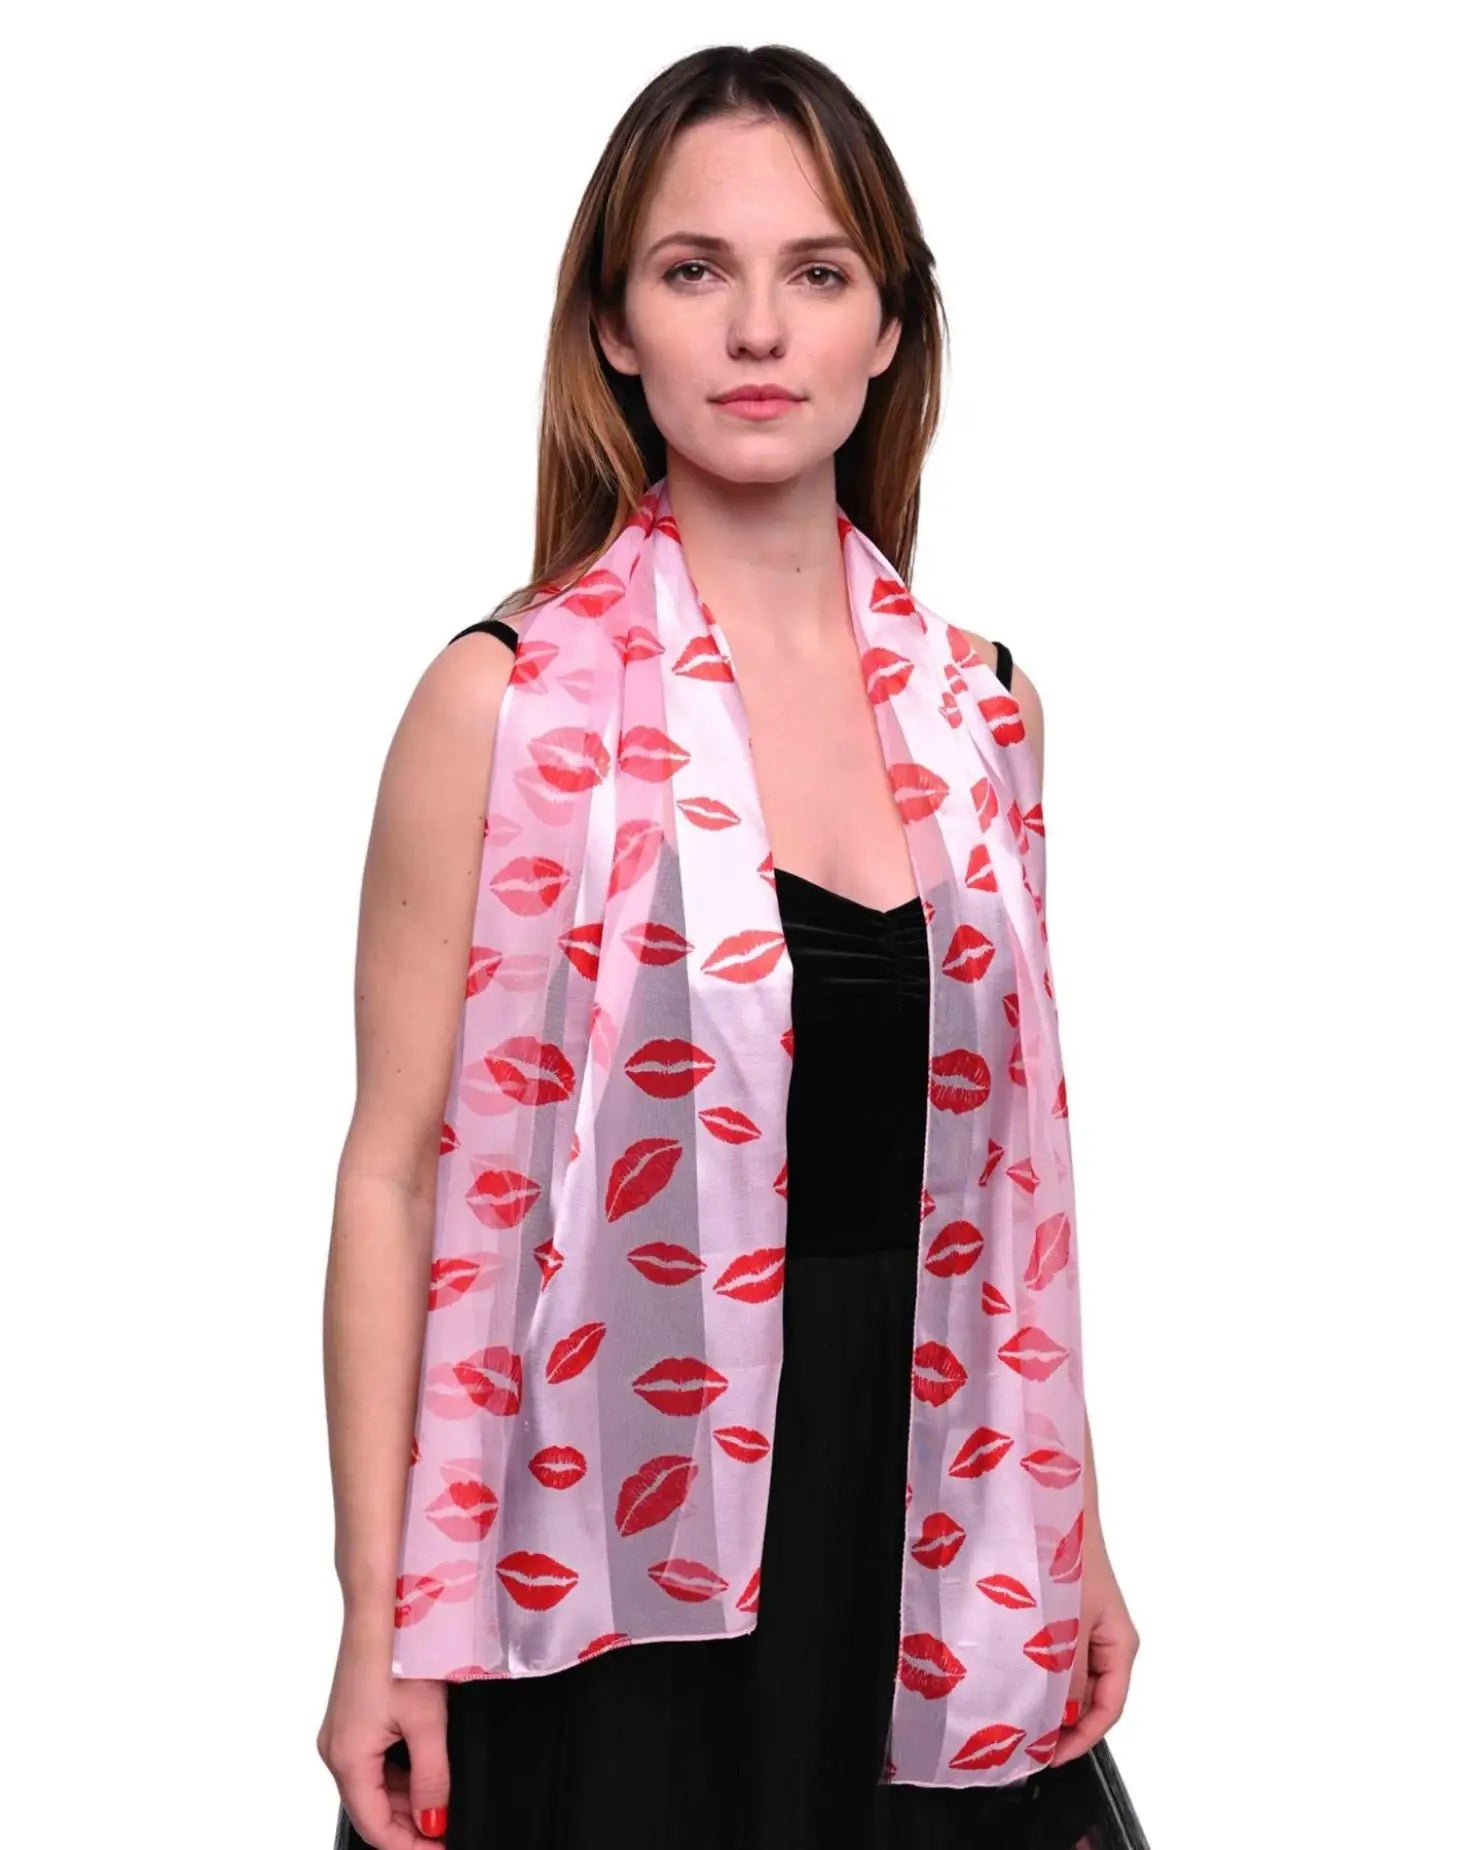 Woman wearing satin lightweight scarf with kiss mark design.